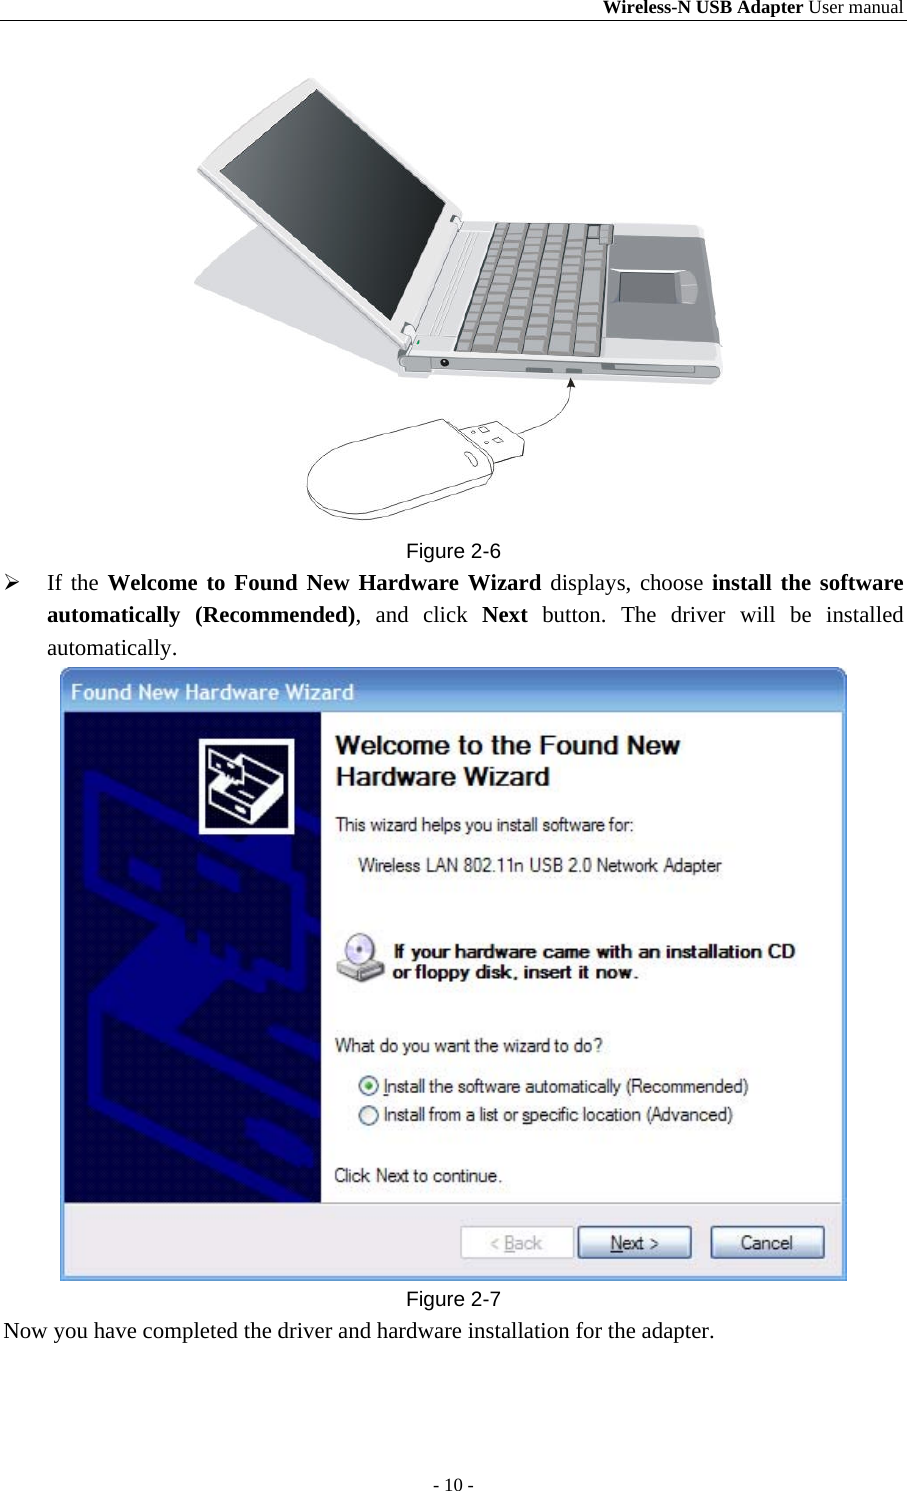 Wireless-N USB Adapter User manual - 10 -  Figure 2-6  If the Welcome to Found New Hardware Wizard displays, choose install the software automatically (Recommended), and click Next button. The driver will be installed automatically.  Figure 2-7 Now you have completed the driver and hardware installation for the adapter. 